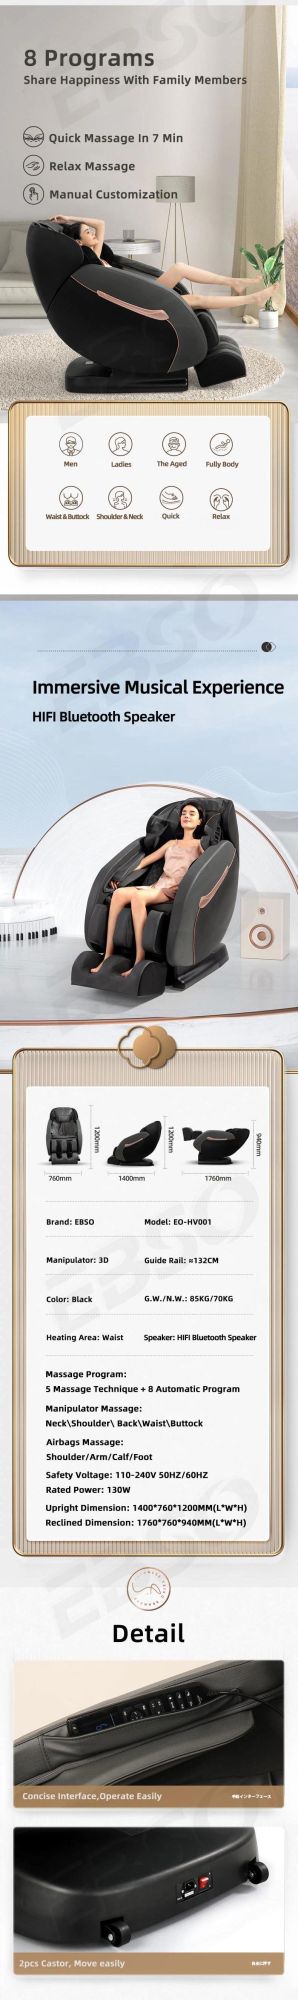 Healthcare Recliner Zero Gravity Massage Chair Talented Massager for Full Body with Good Quality at Good Price